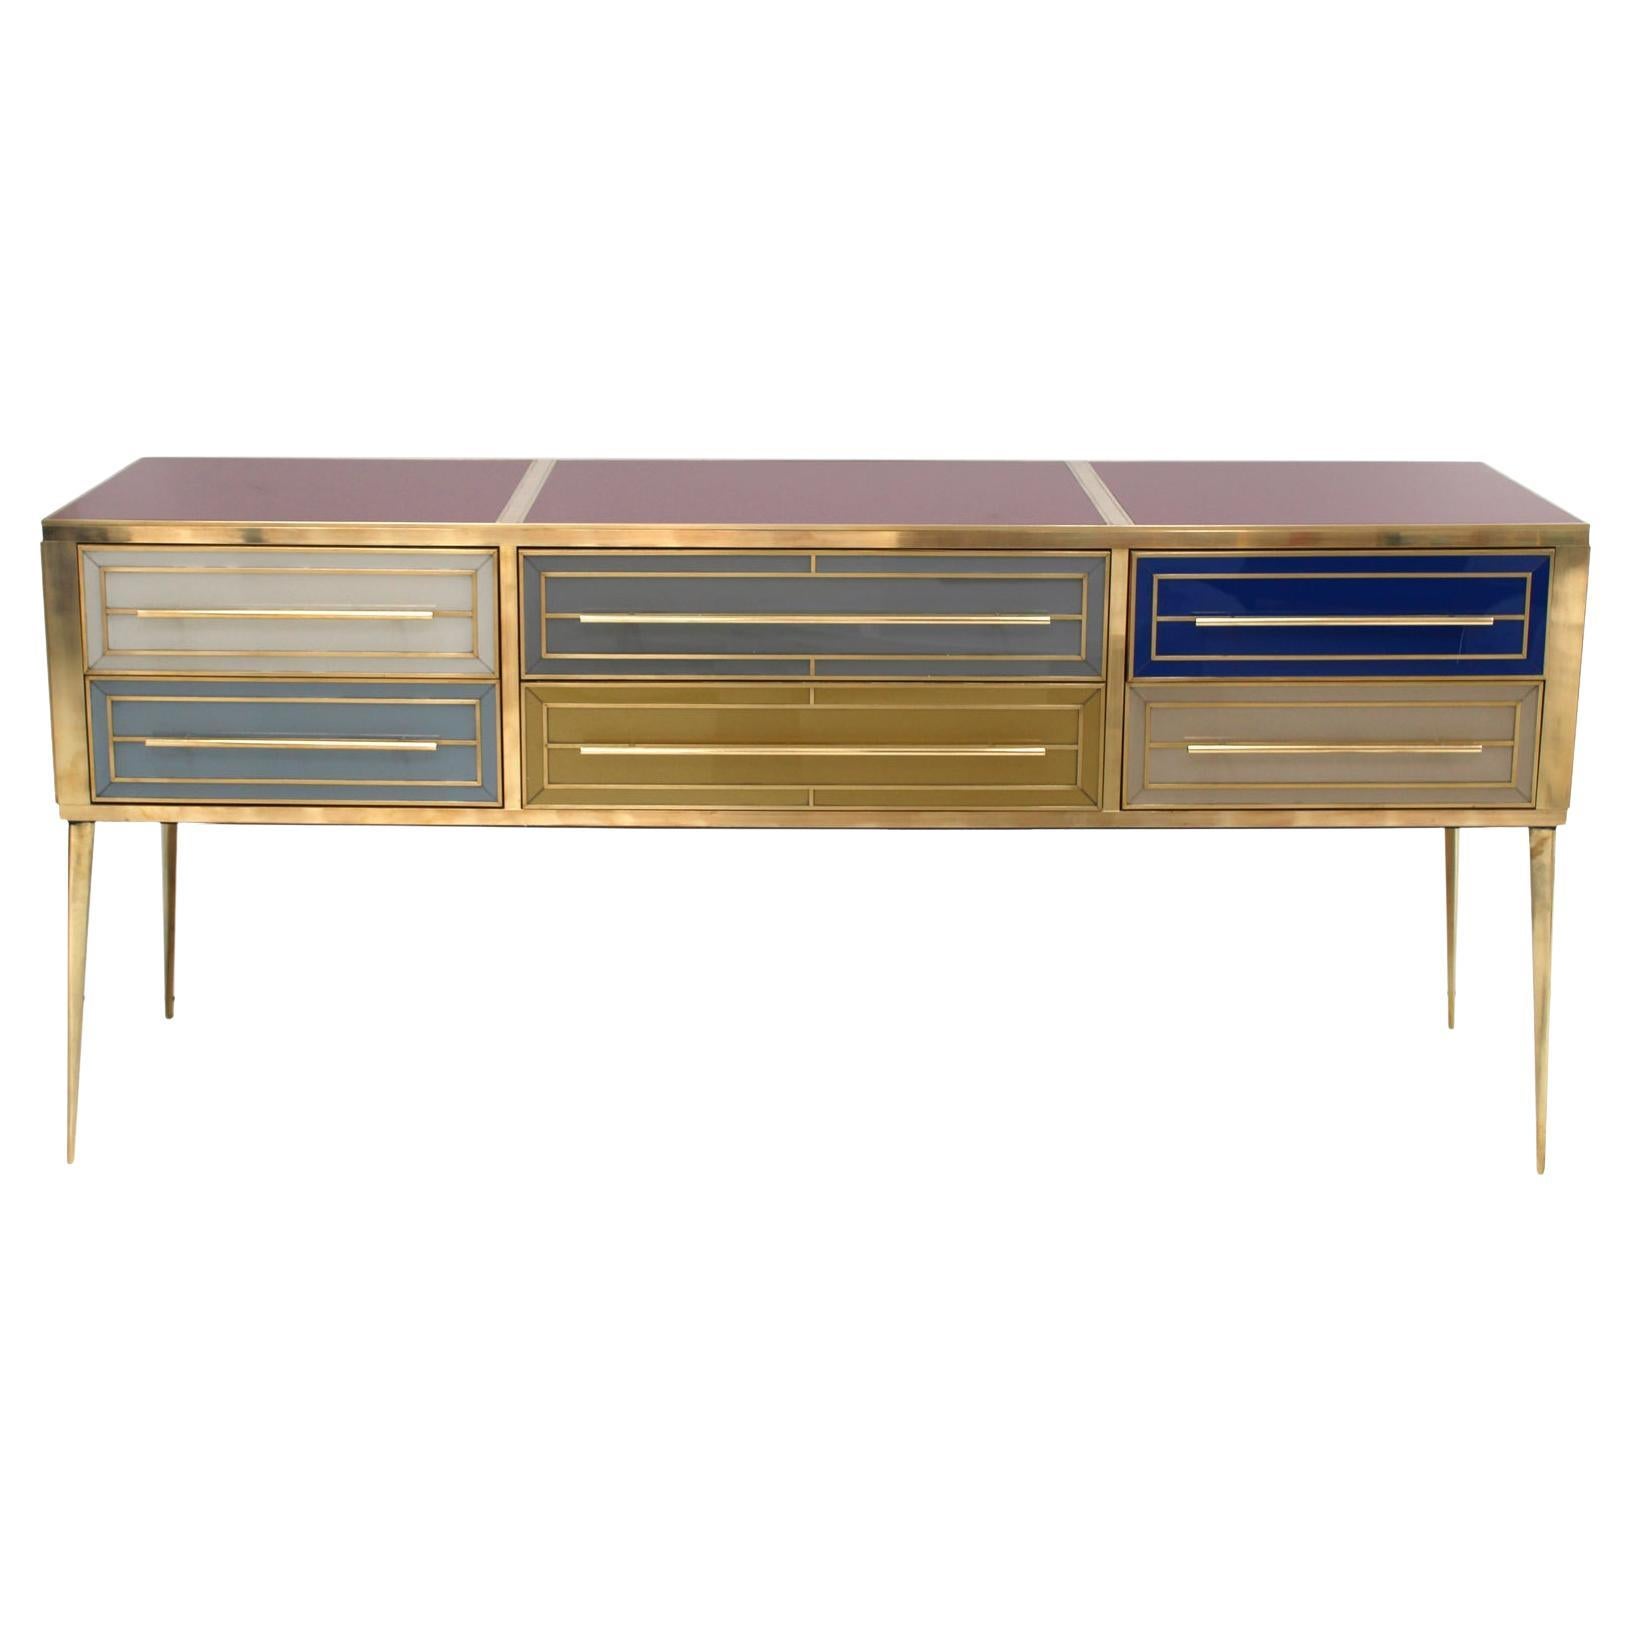 Midcentury Style Italian Sideboard Made of Wood and Covered with Colored Glass For Sale